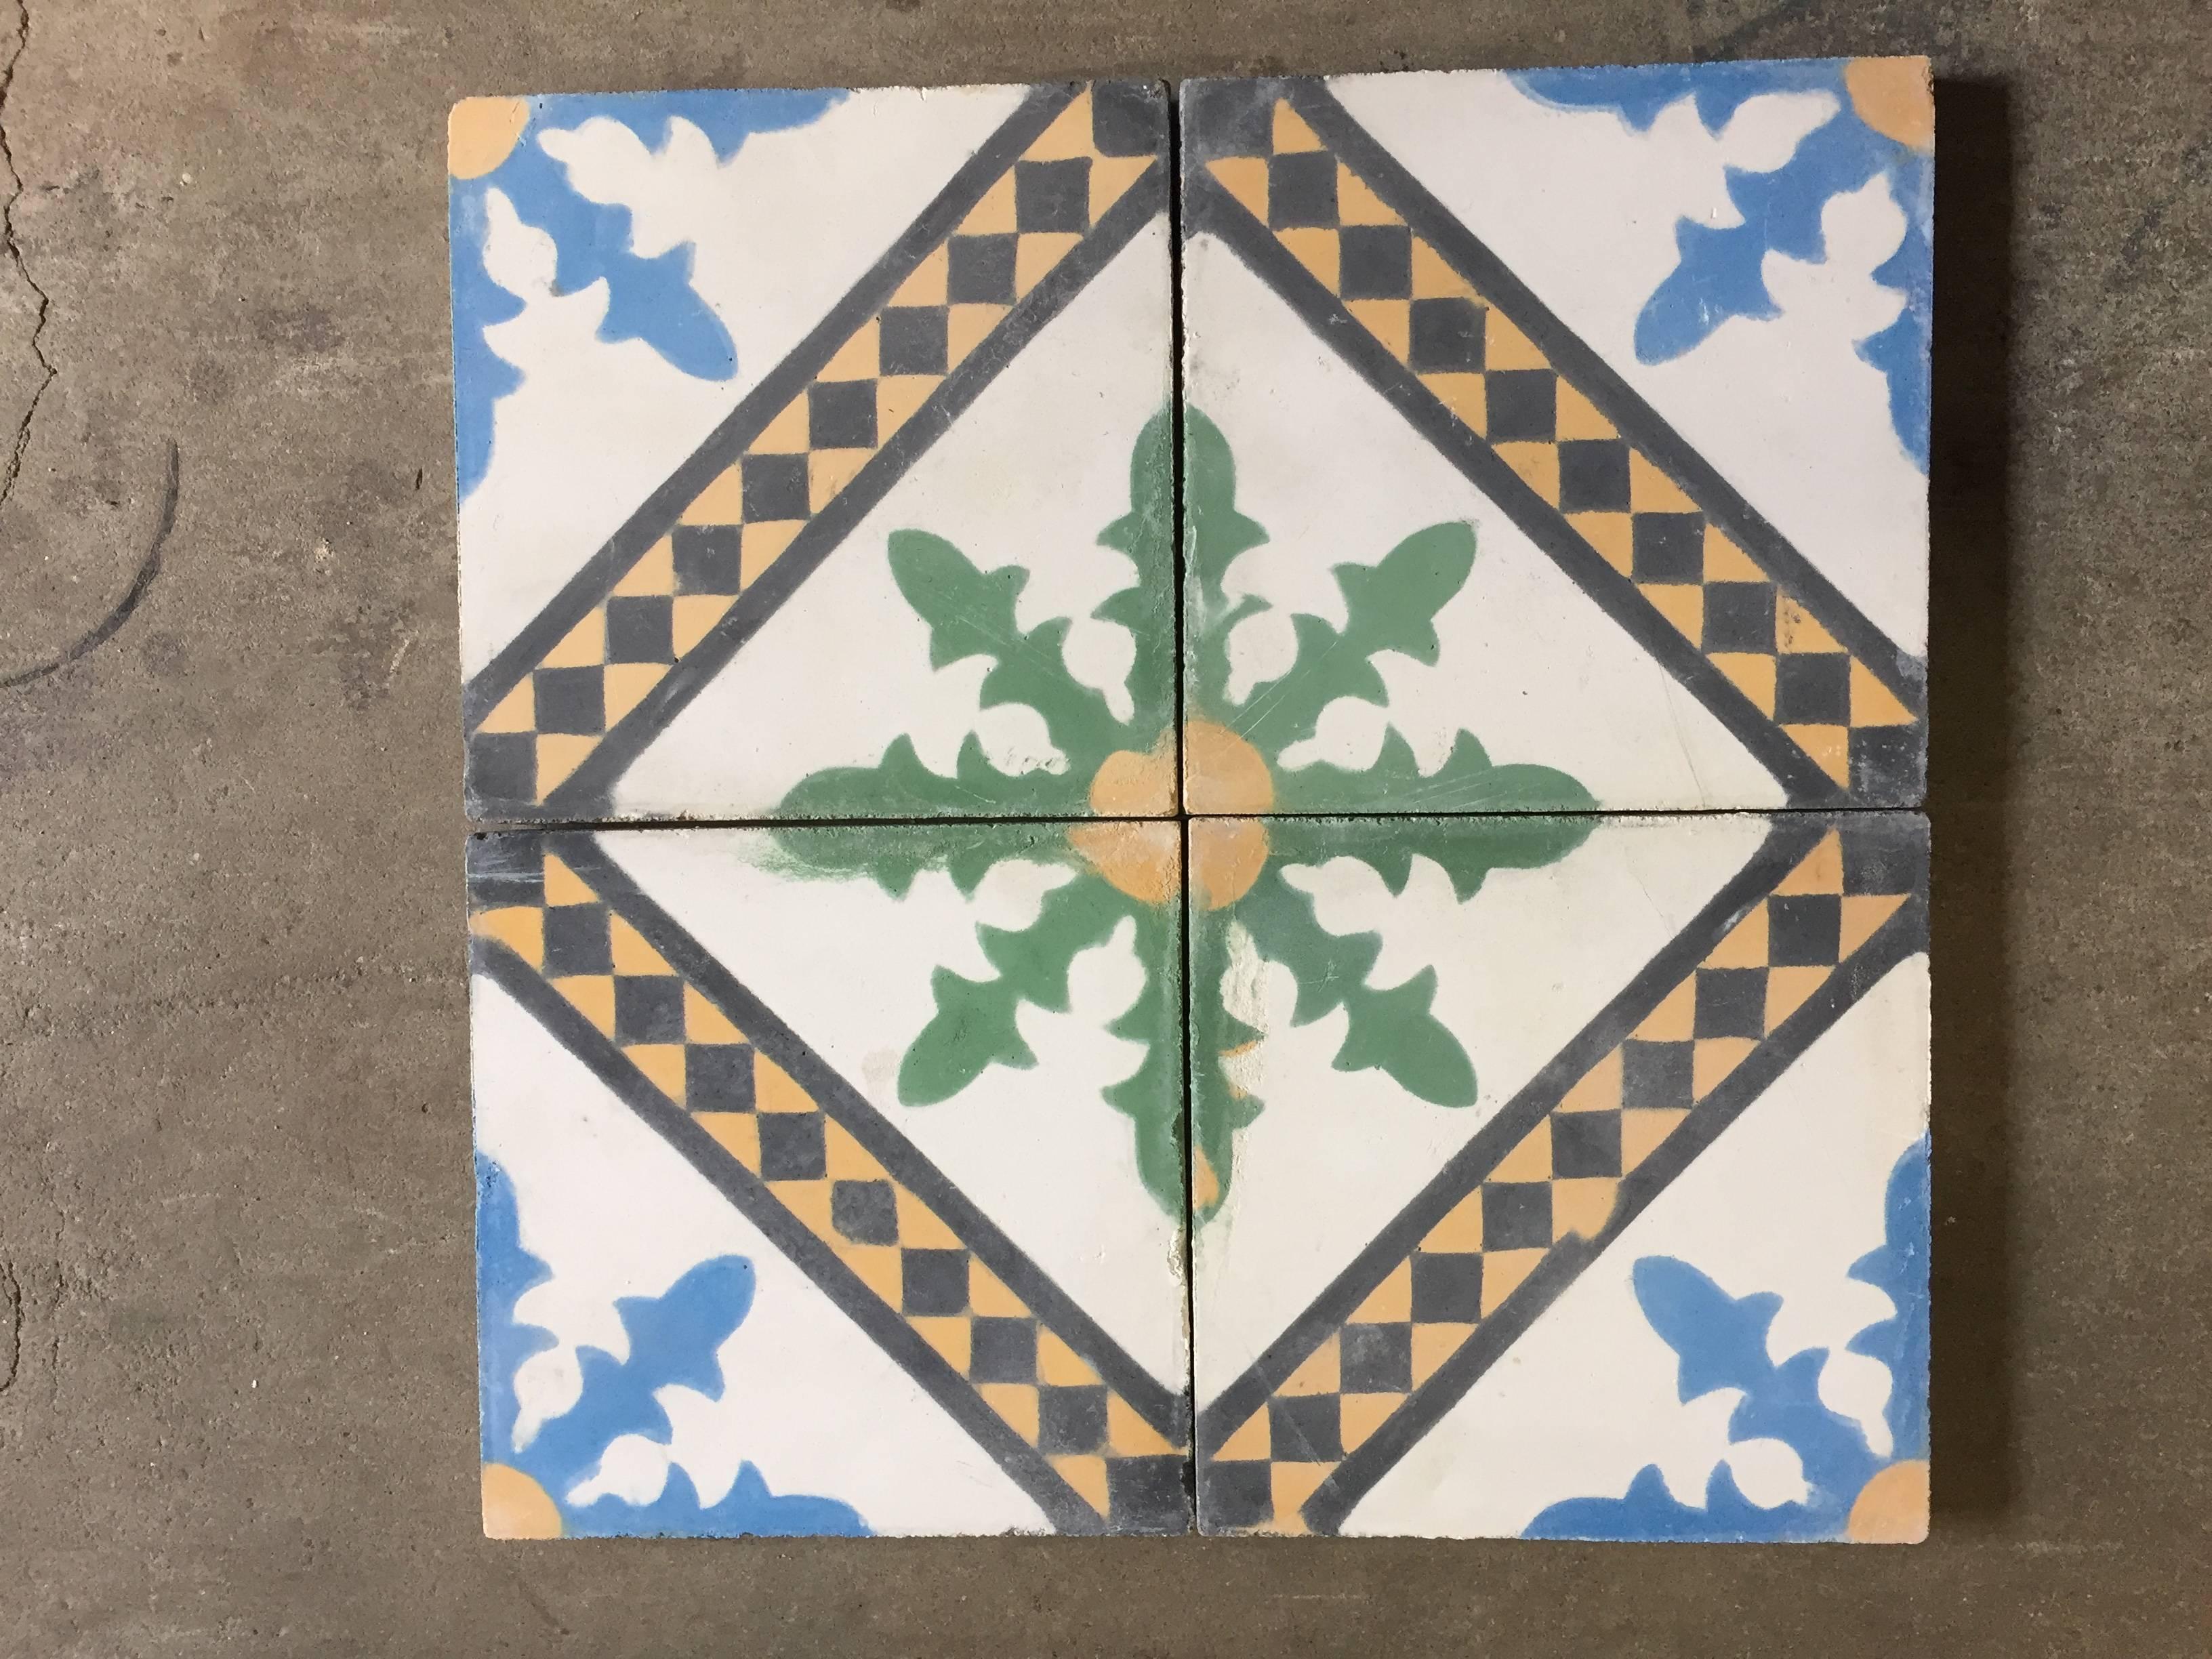 Moroccan handcrafted and hand-painted cement tile with traditional Fez design. These are authentic Moroccan encaustic tiles hand made by artisans in Fez, Morocco. This is the traditional Moroccan star design. 
These are handmade cement tiles many